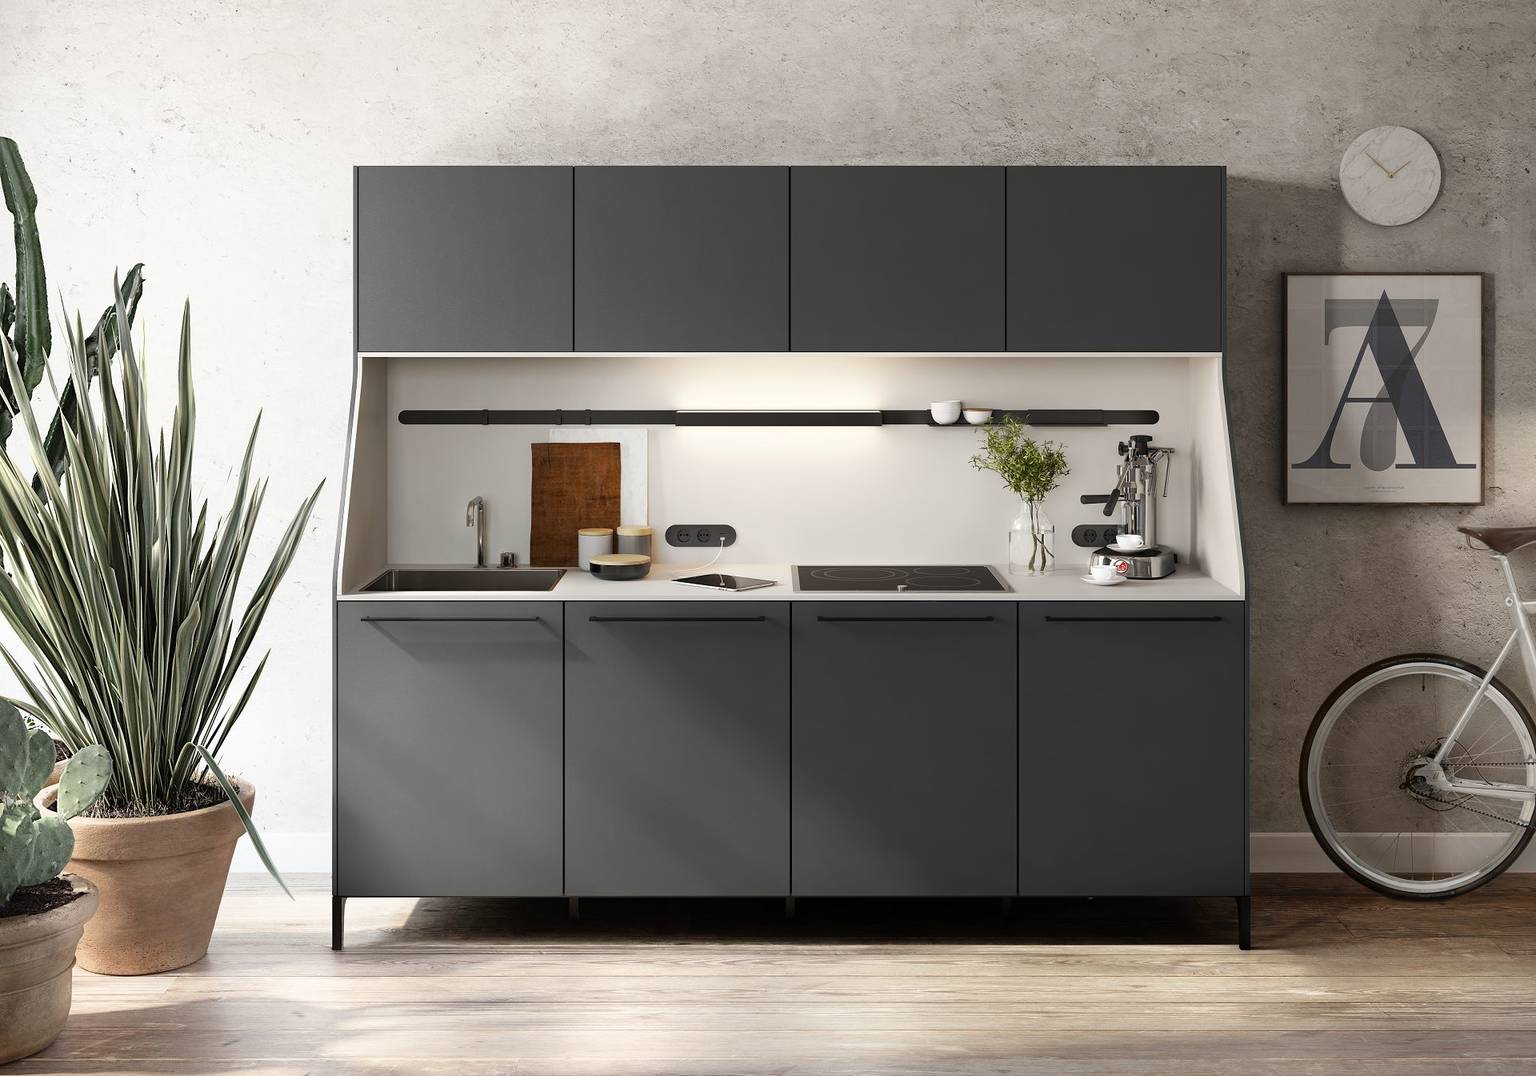 SieMatic 29 kitchen sideboard from the Urban style collection in graphite grey with sink and stovetop